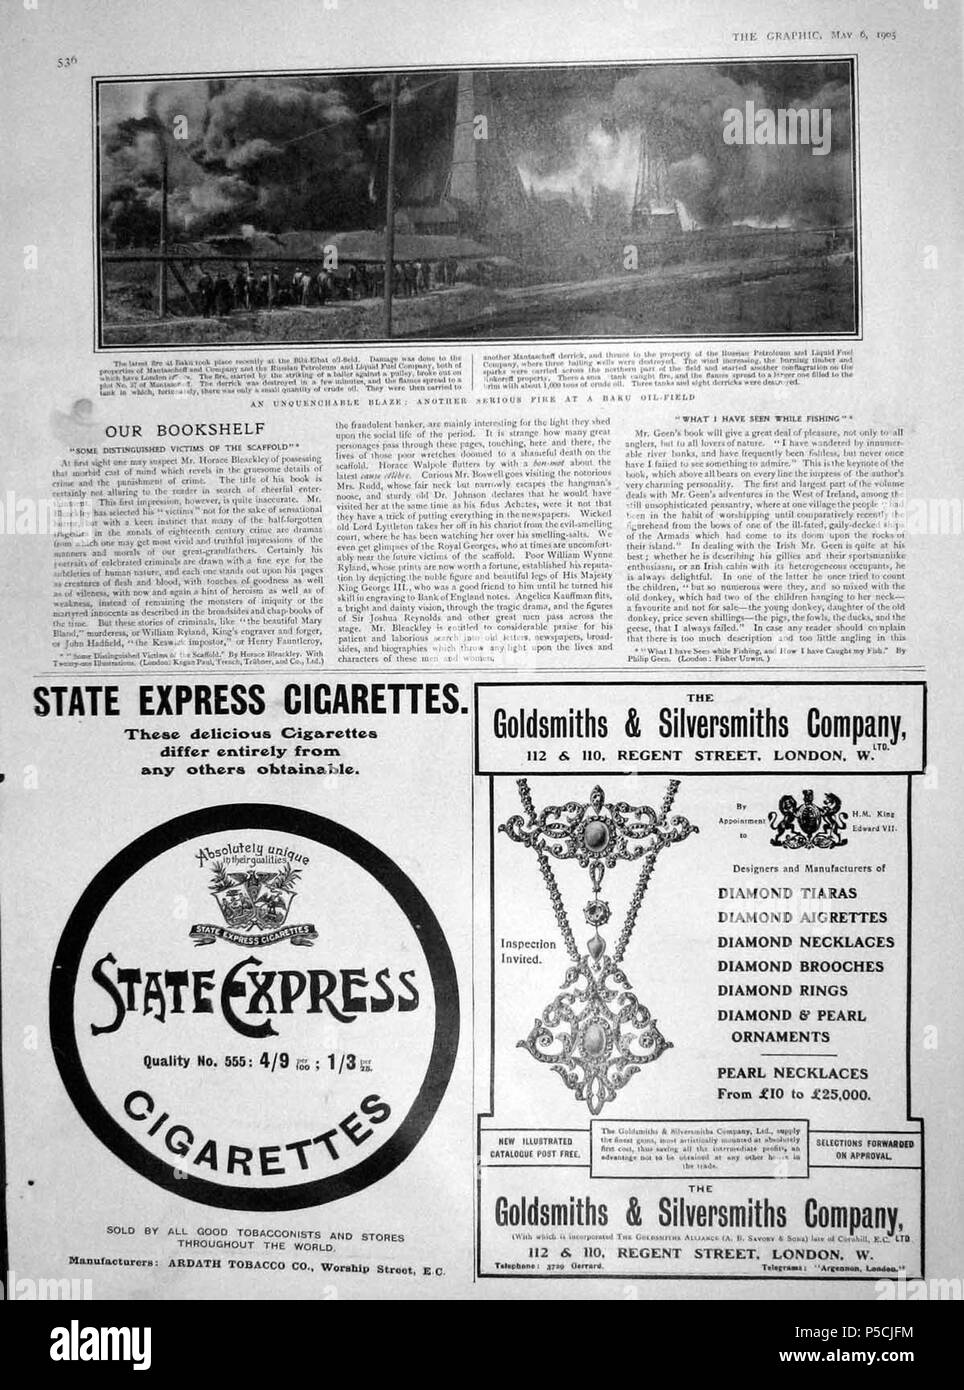 N A English A Full Page From The Graphic An Illustrated Weekly Newspaper Dated 1905 The Image Size Is Approximately 15 5 X 11 Inches 395x280 6 May 1905 Unknown Published By The Graphic